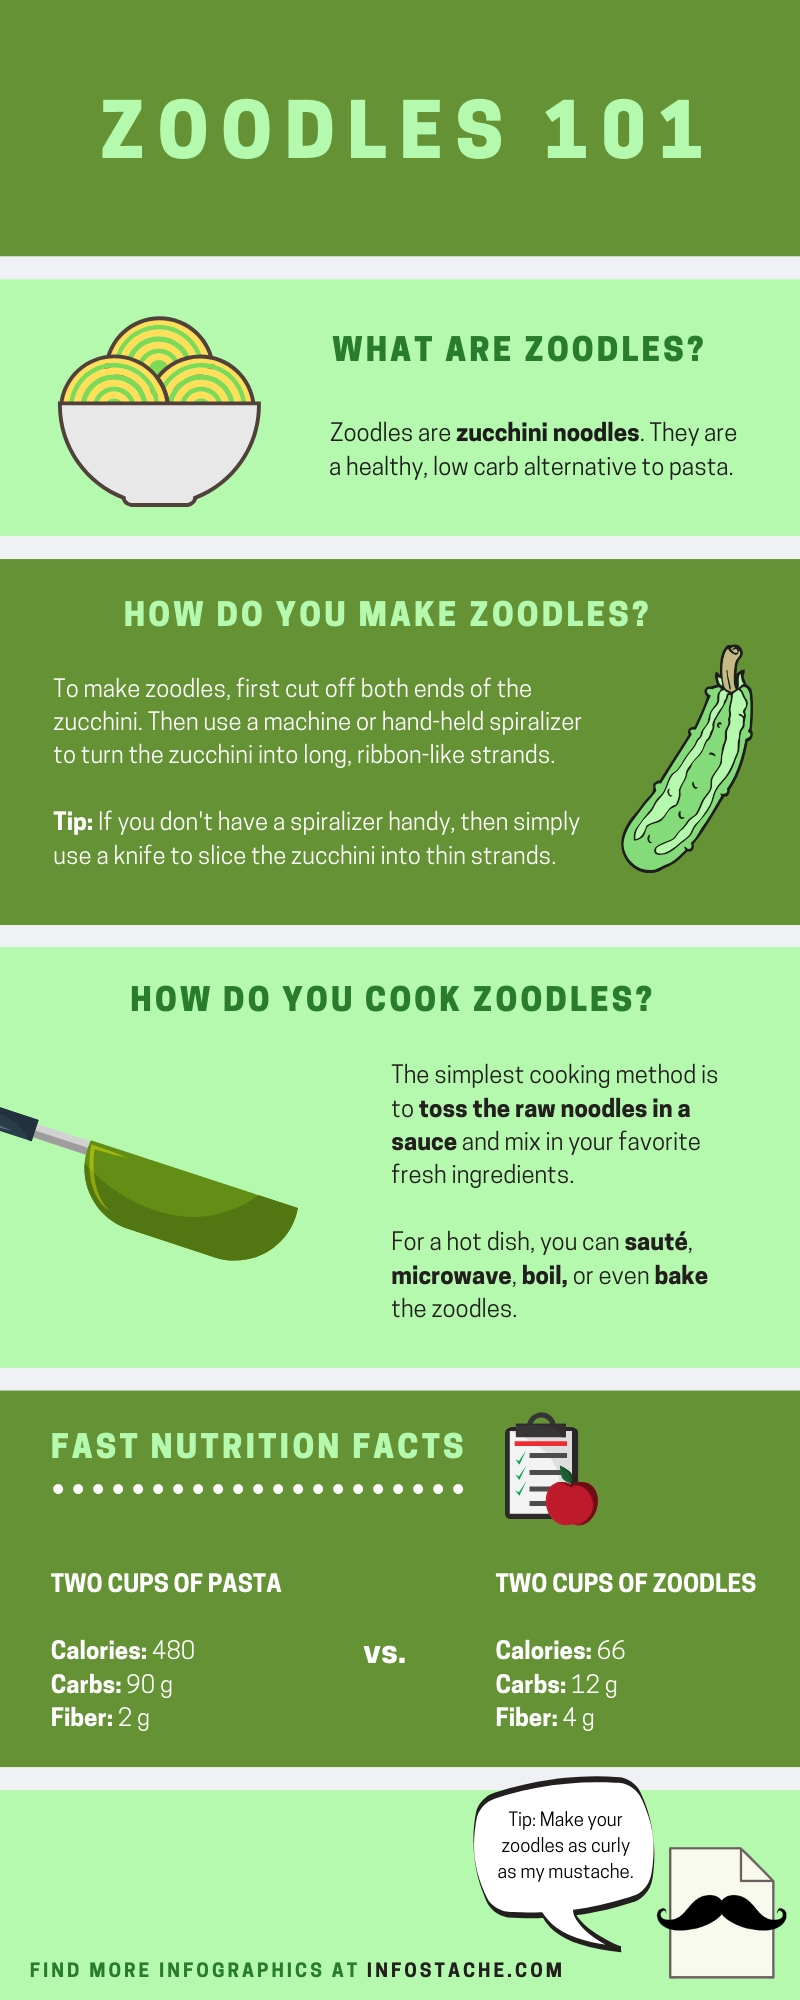 Zoodles 101 Infographic